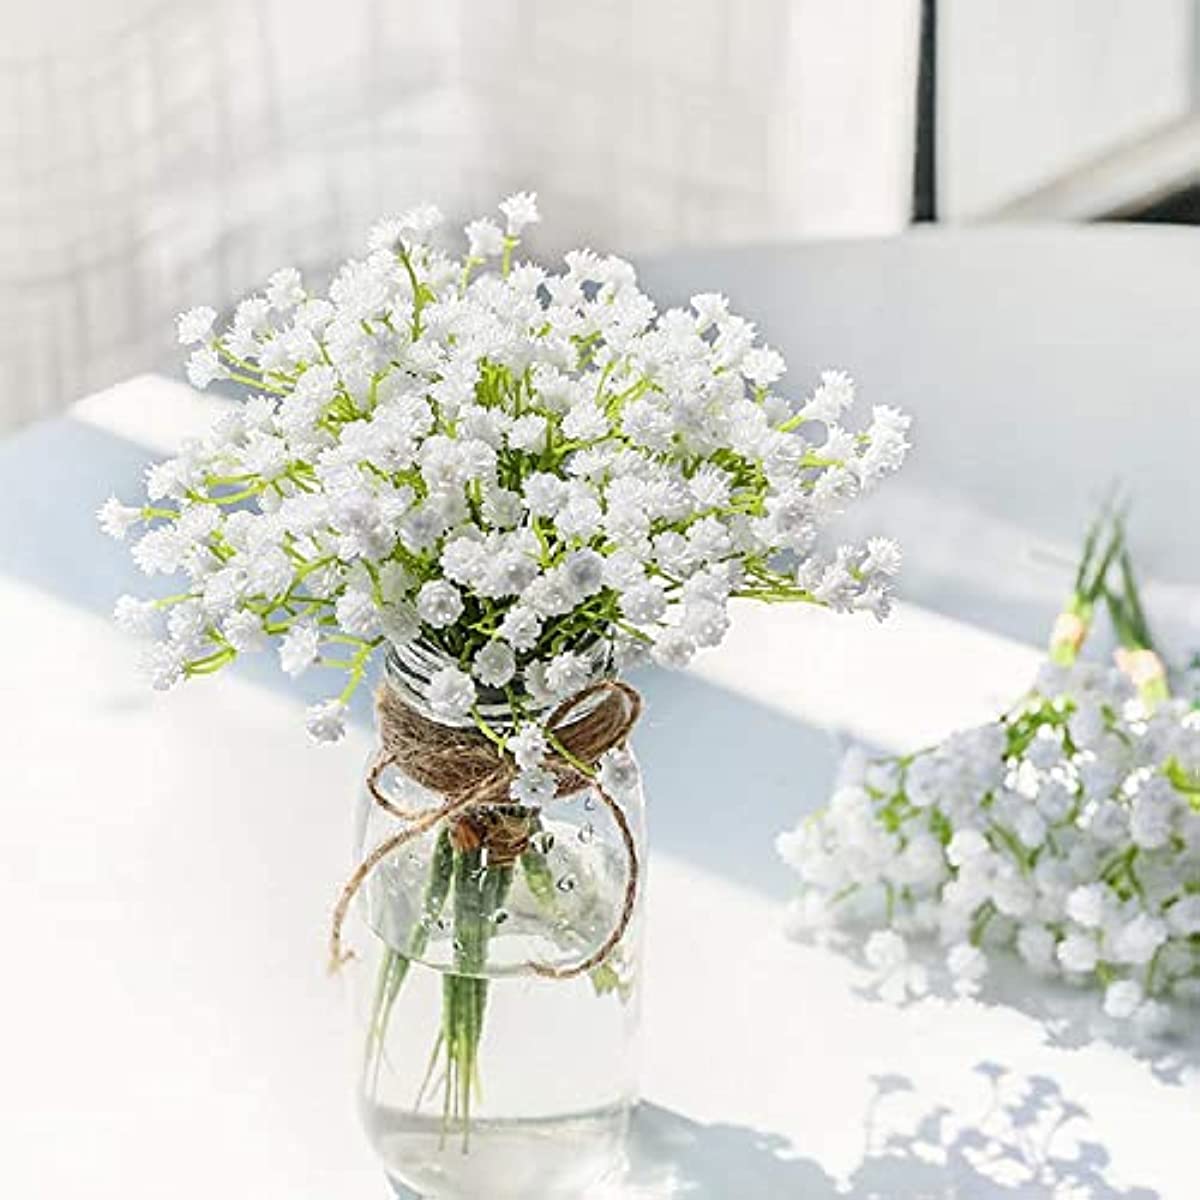  N&T NIETING Baby Breath Flowers,15Pcs Fake Gypsophila Plants  Artificial Baby Breath Flowers for Wedding Bouquets Party Home Garden  Decoration, White : Health & Household